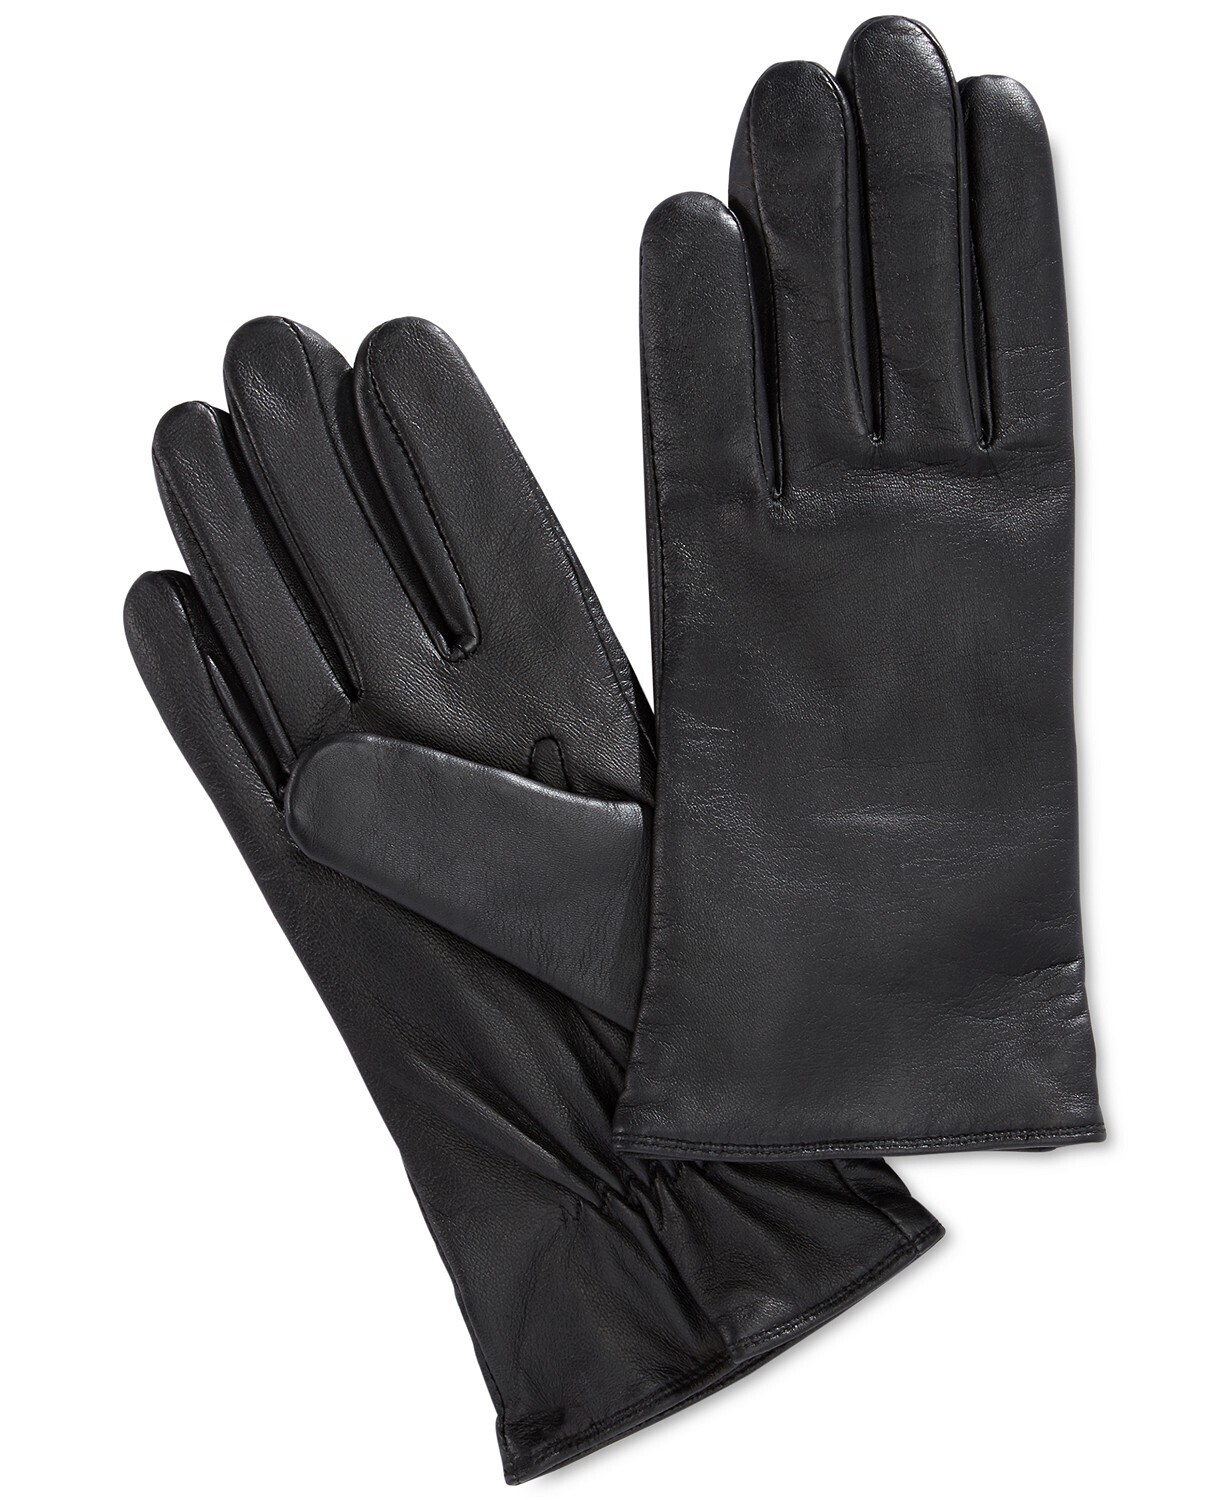 Charter Club Women's Cashmere Lined Leather Tech Gloves (L)